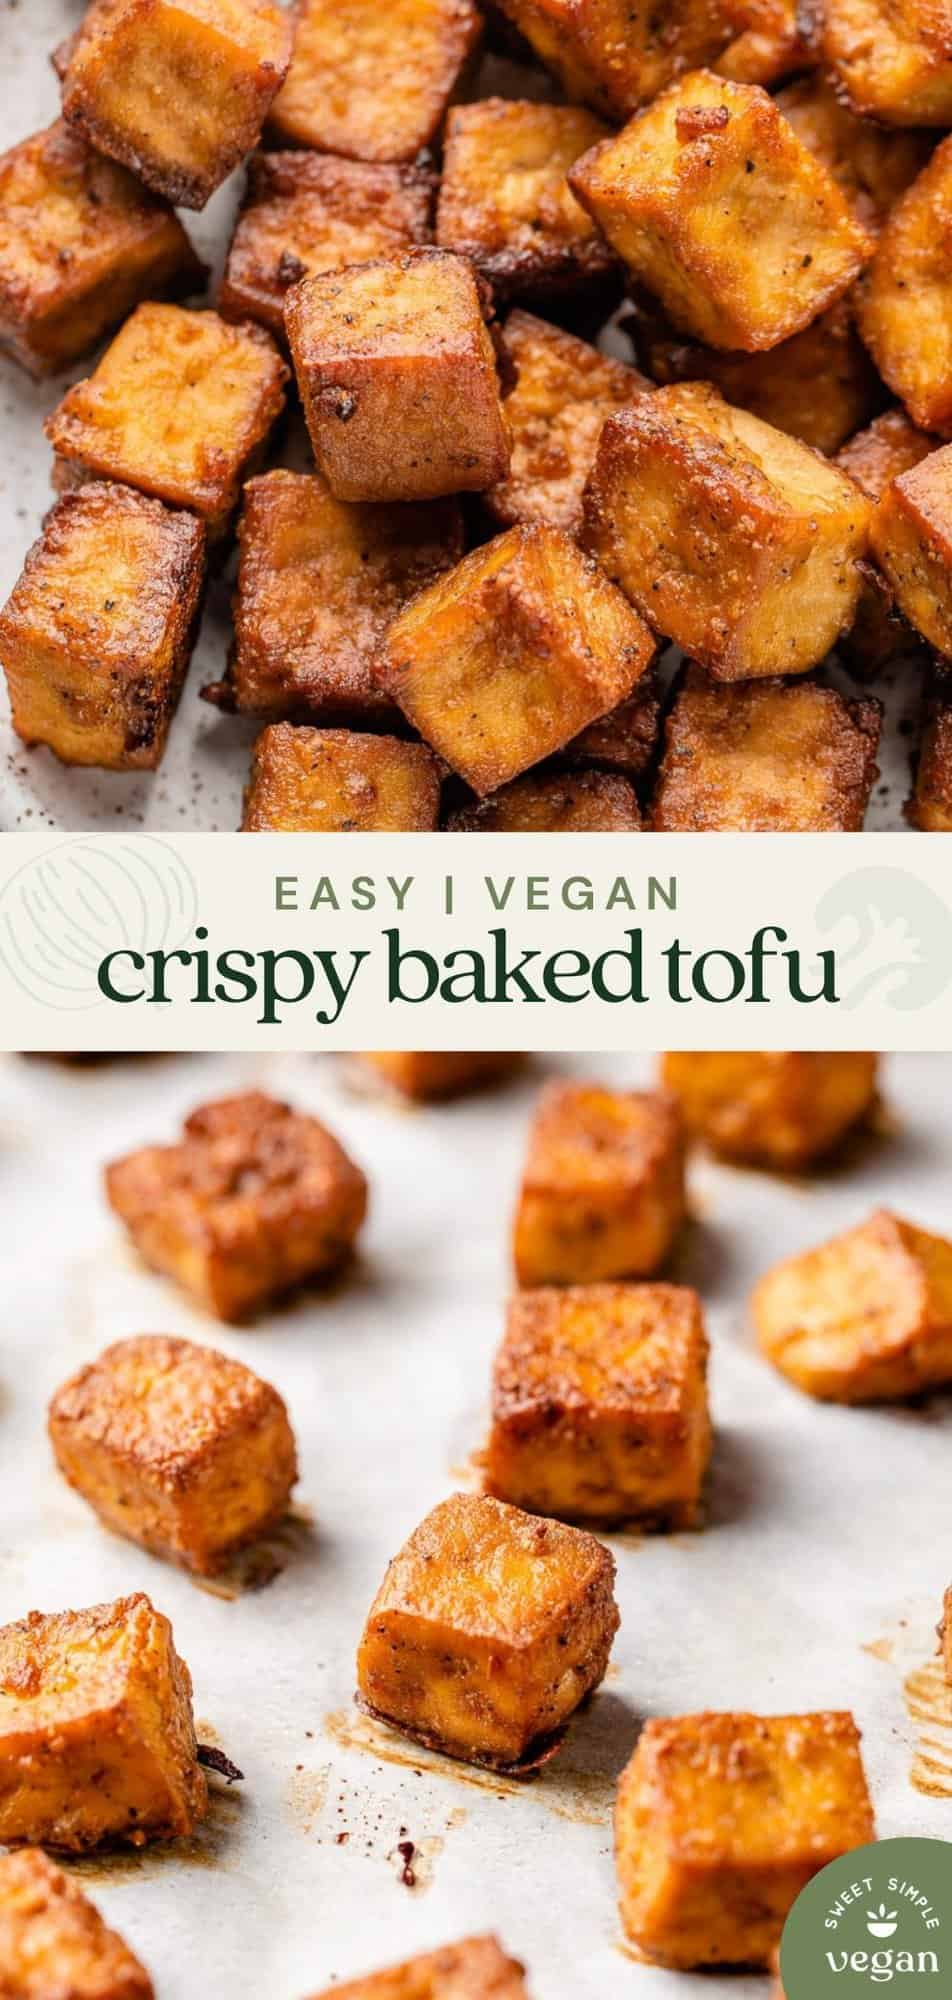 Pinterest image with crispy baked tofu on sheet pan and on a plate